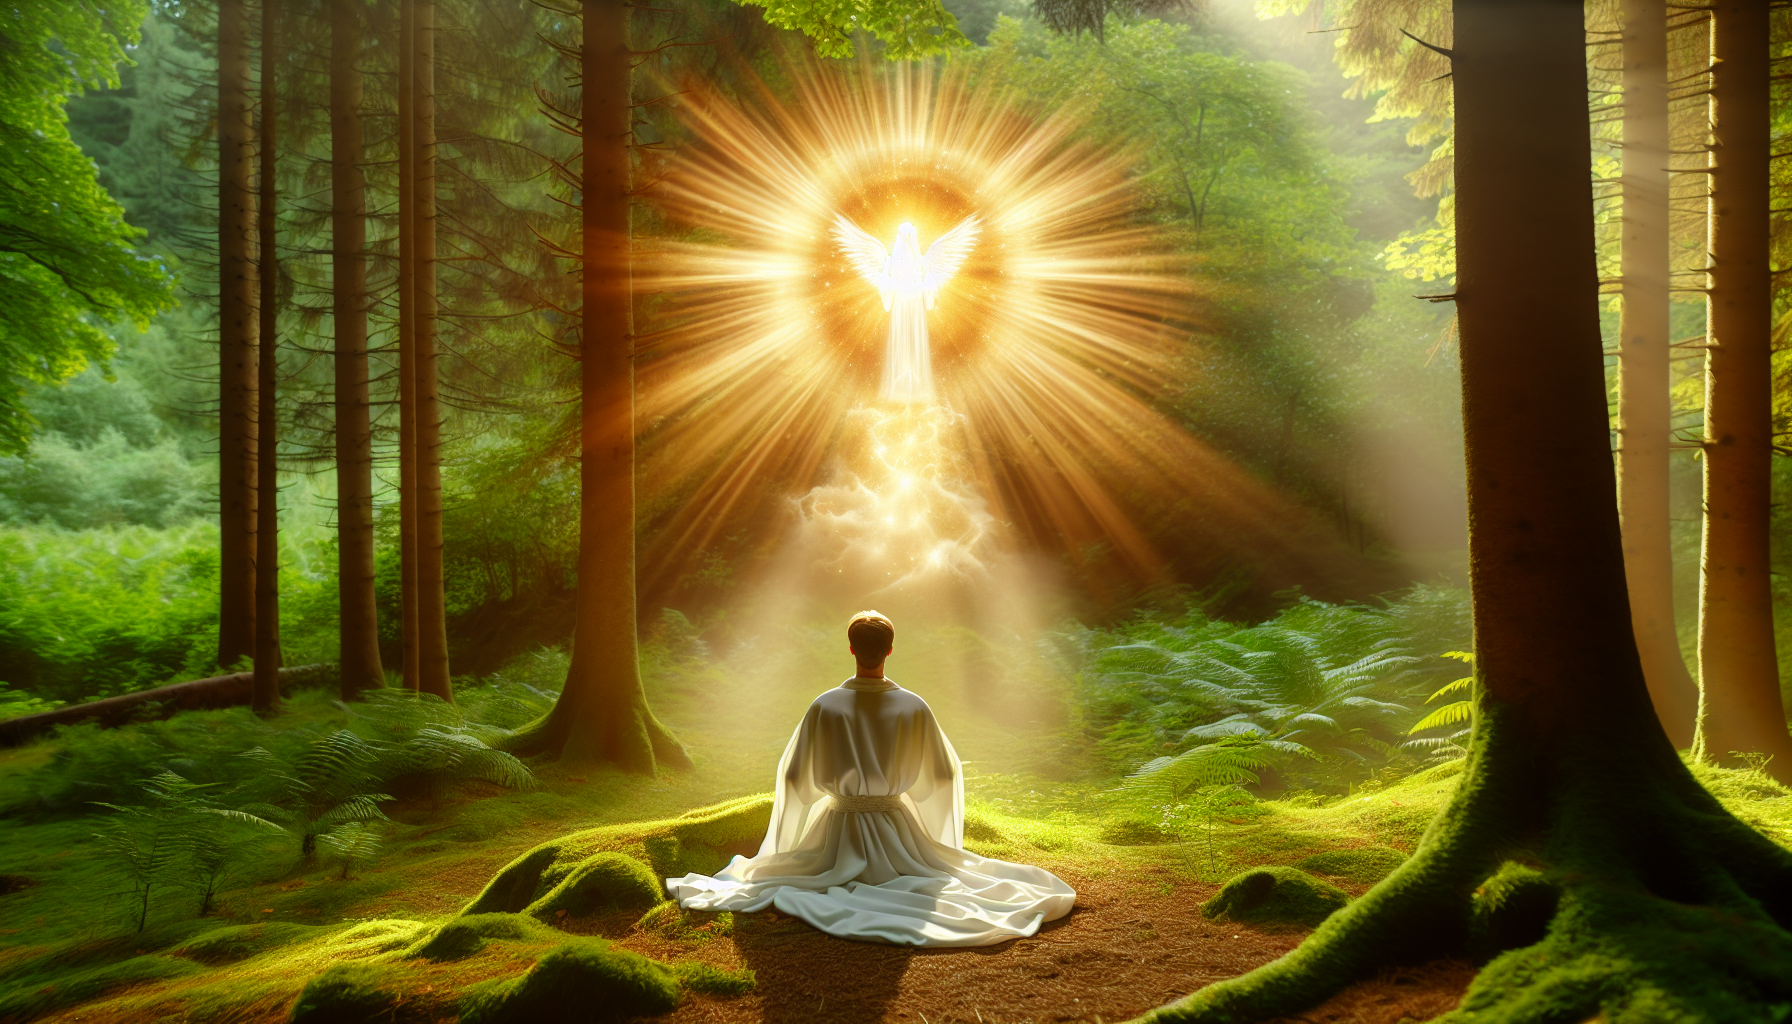 A divine light shining on a healer, symbolizing divine protection and guidance